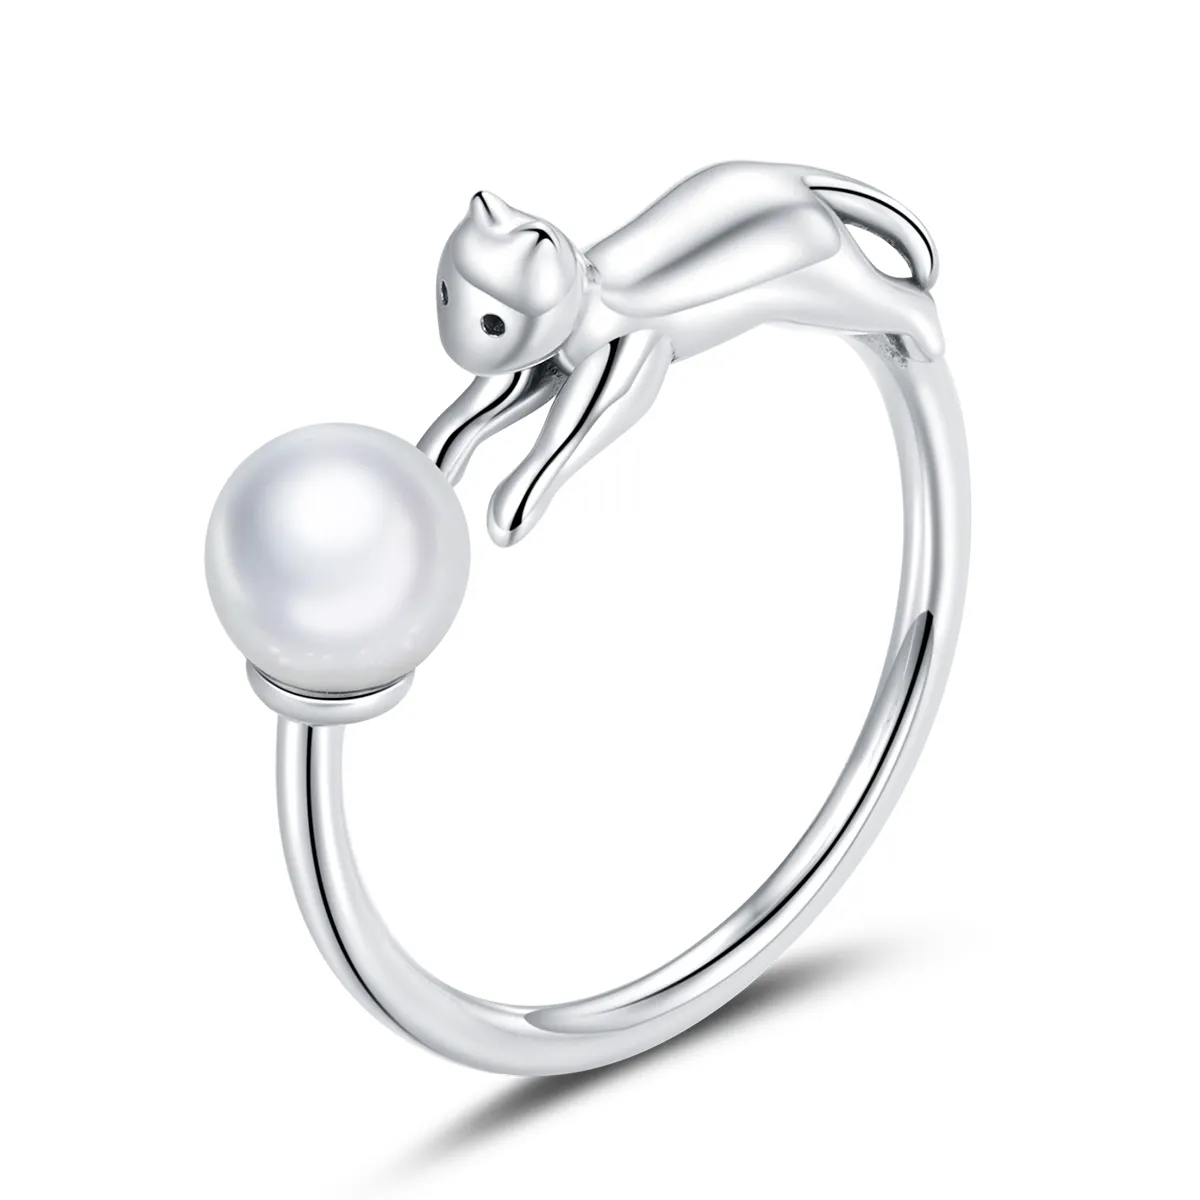 Pandora Style Silver Cat Plays Ball Open Ring - SCR683